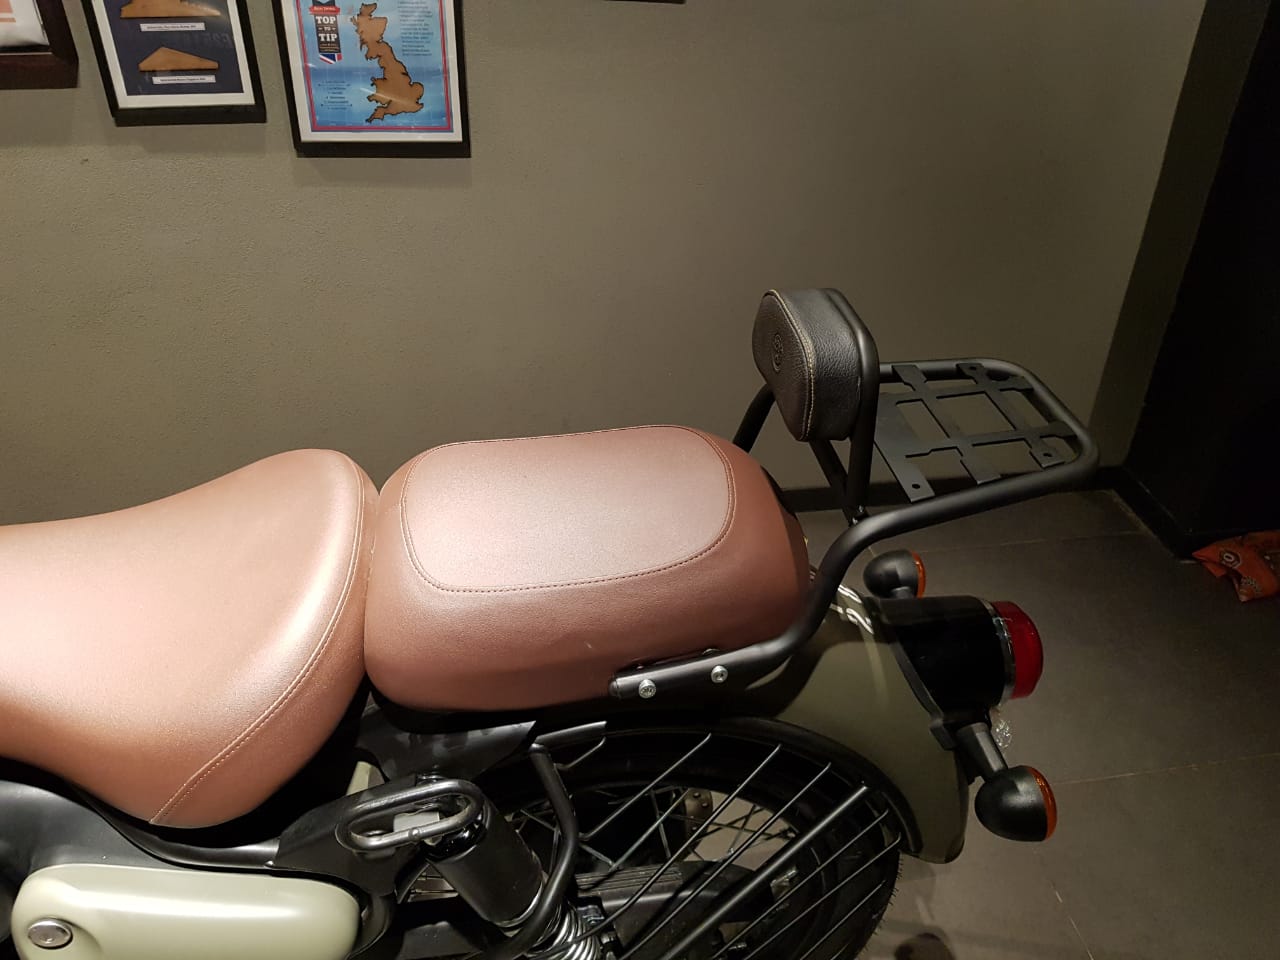 Backrest and Carrier Compatible For Classic Reborn ( 2021 - )